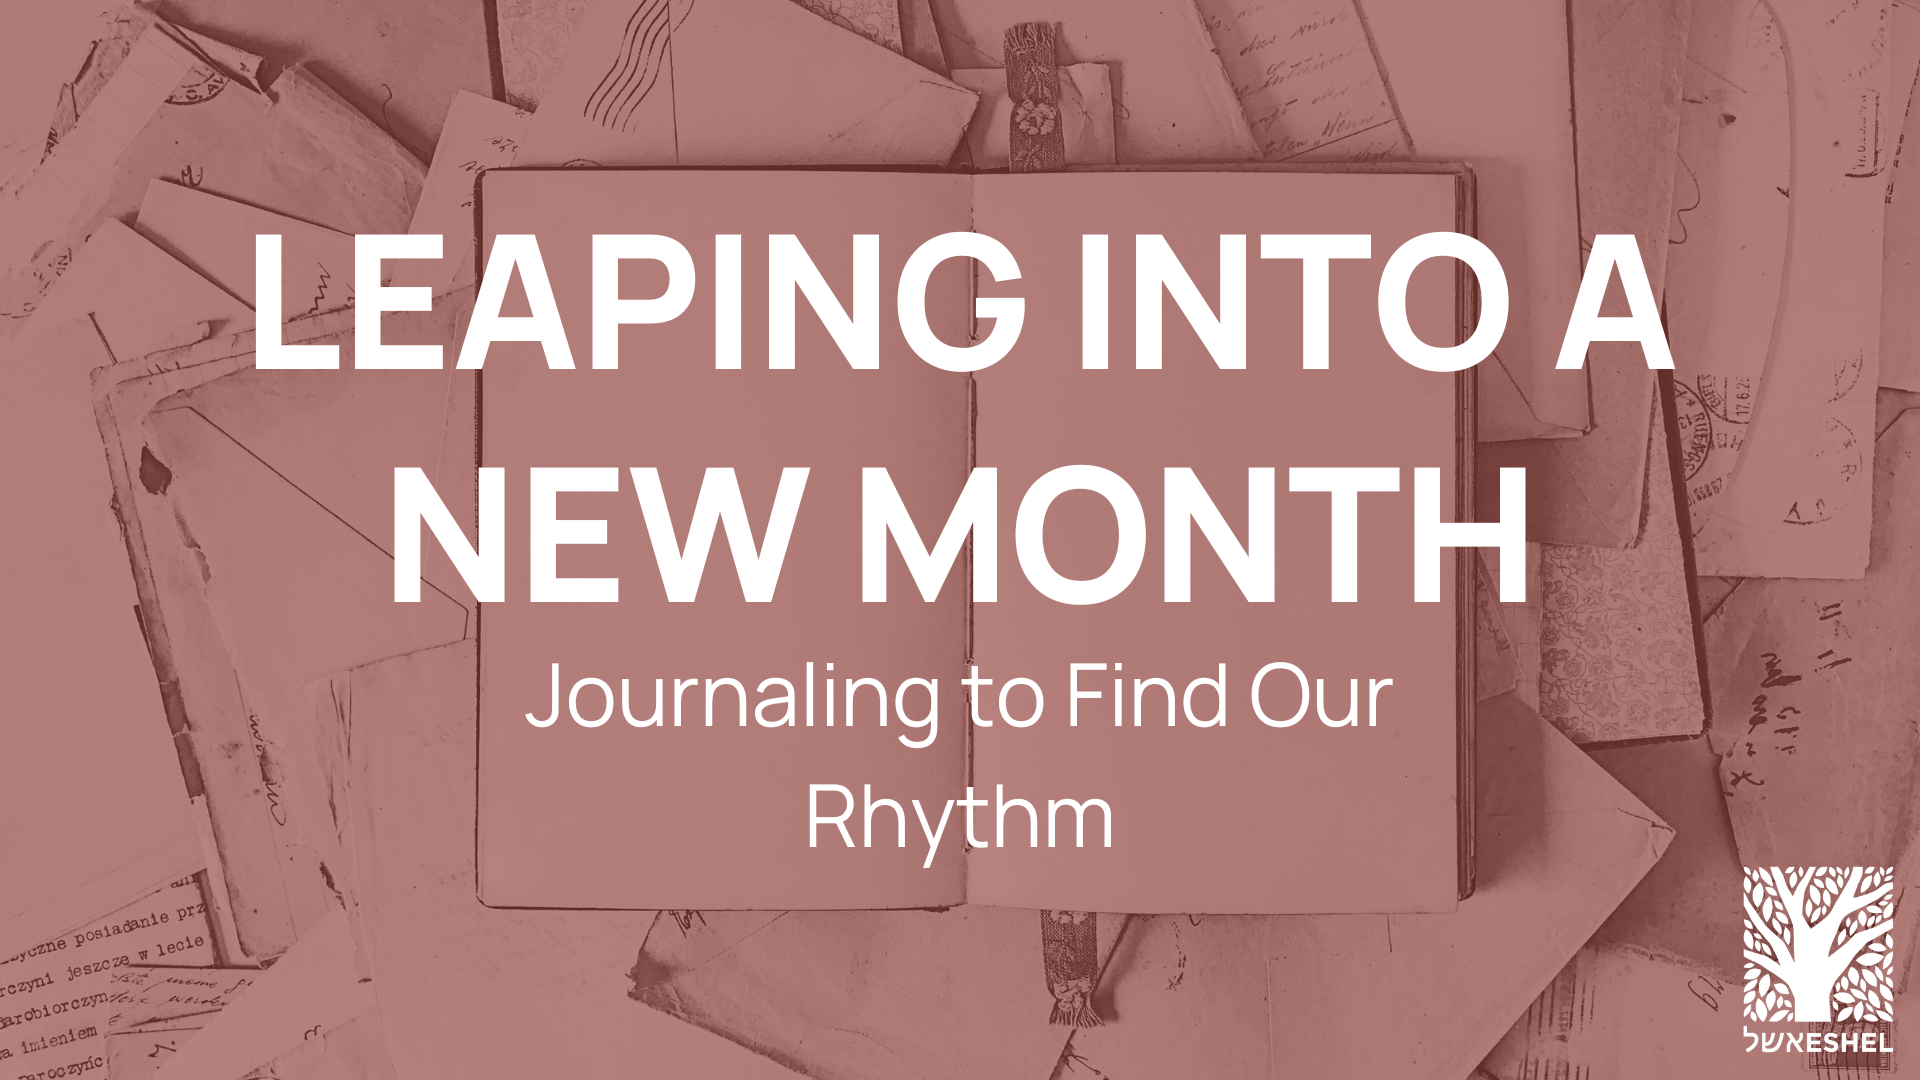 Leaping into a New Month: Journaling to Find Our Rhythm